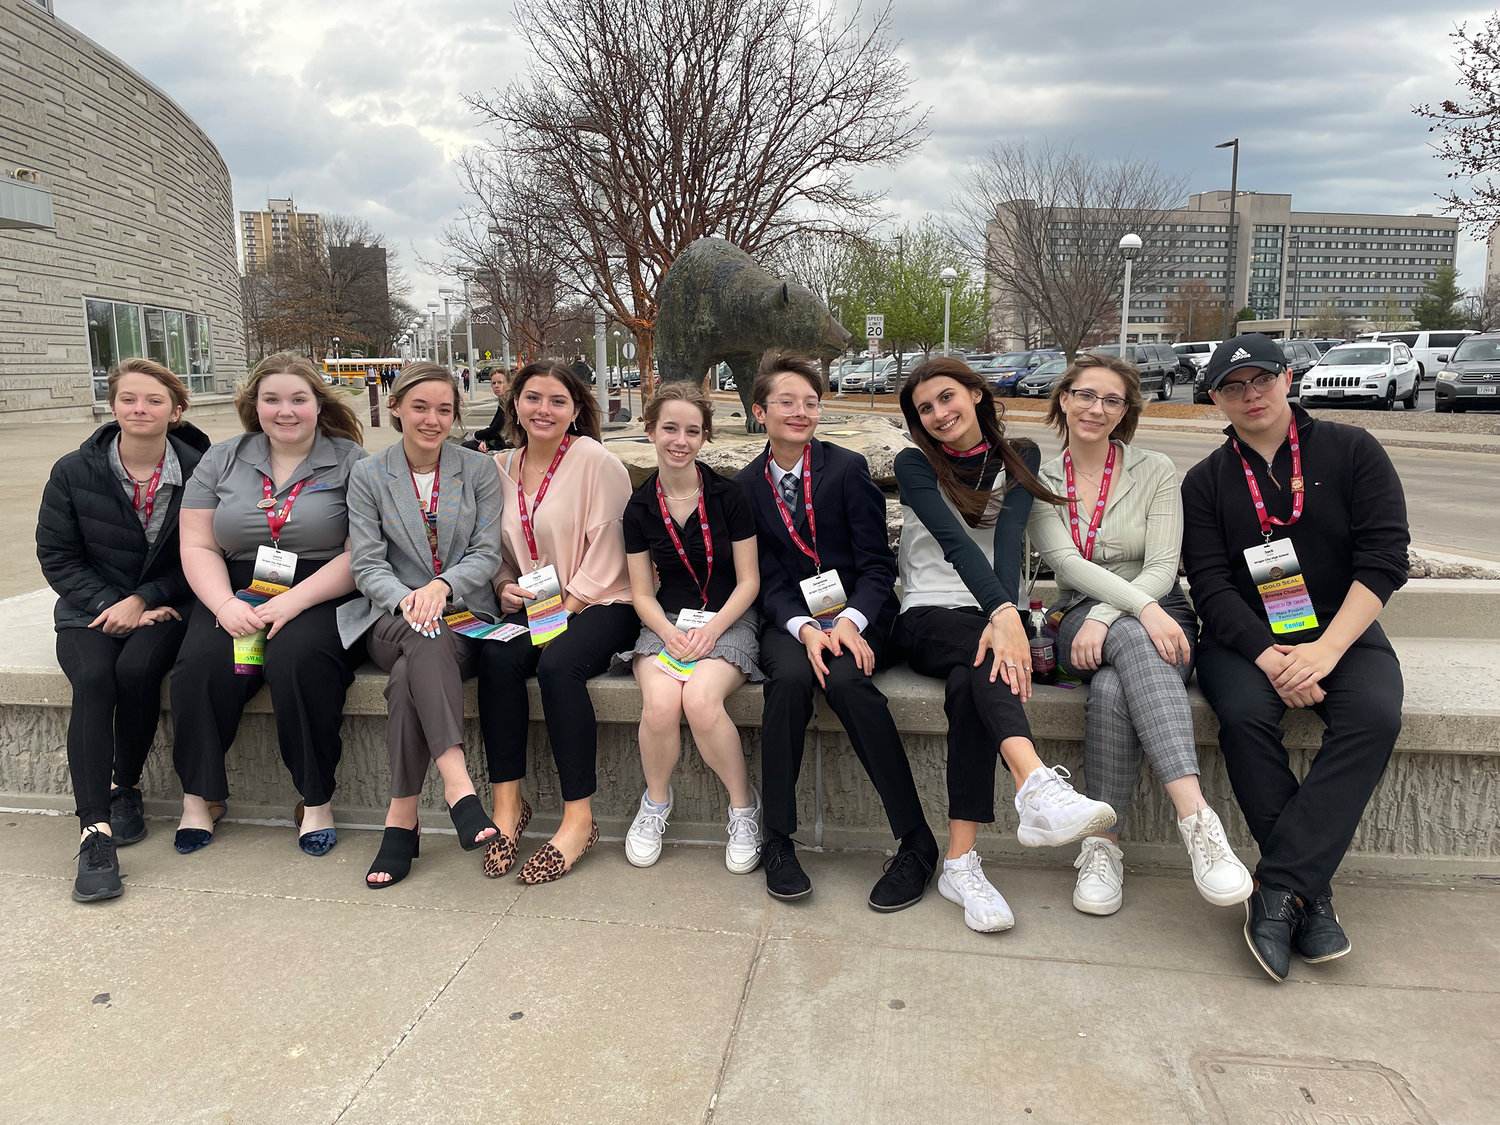 FUTURE LEADERS — Members of the Wright City chapter of Future Business Leaders of America attended the FBLA state conference in Springfield, earning four top placements and one advancement to the national conference.